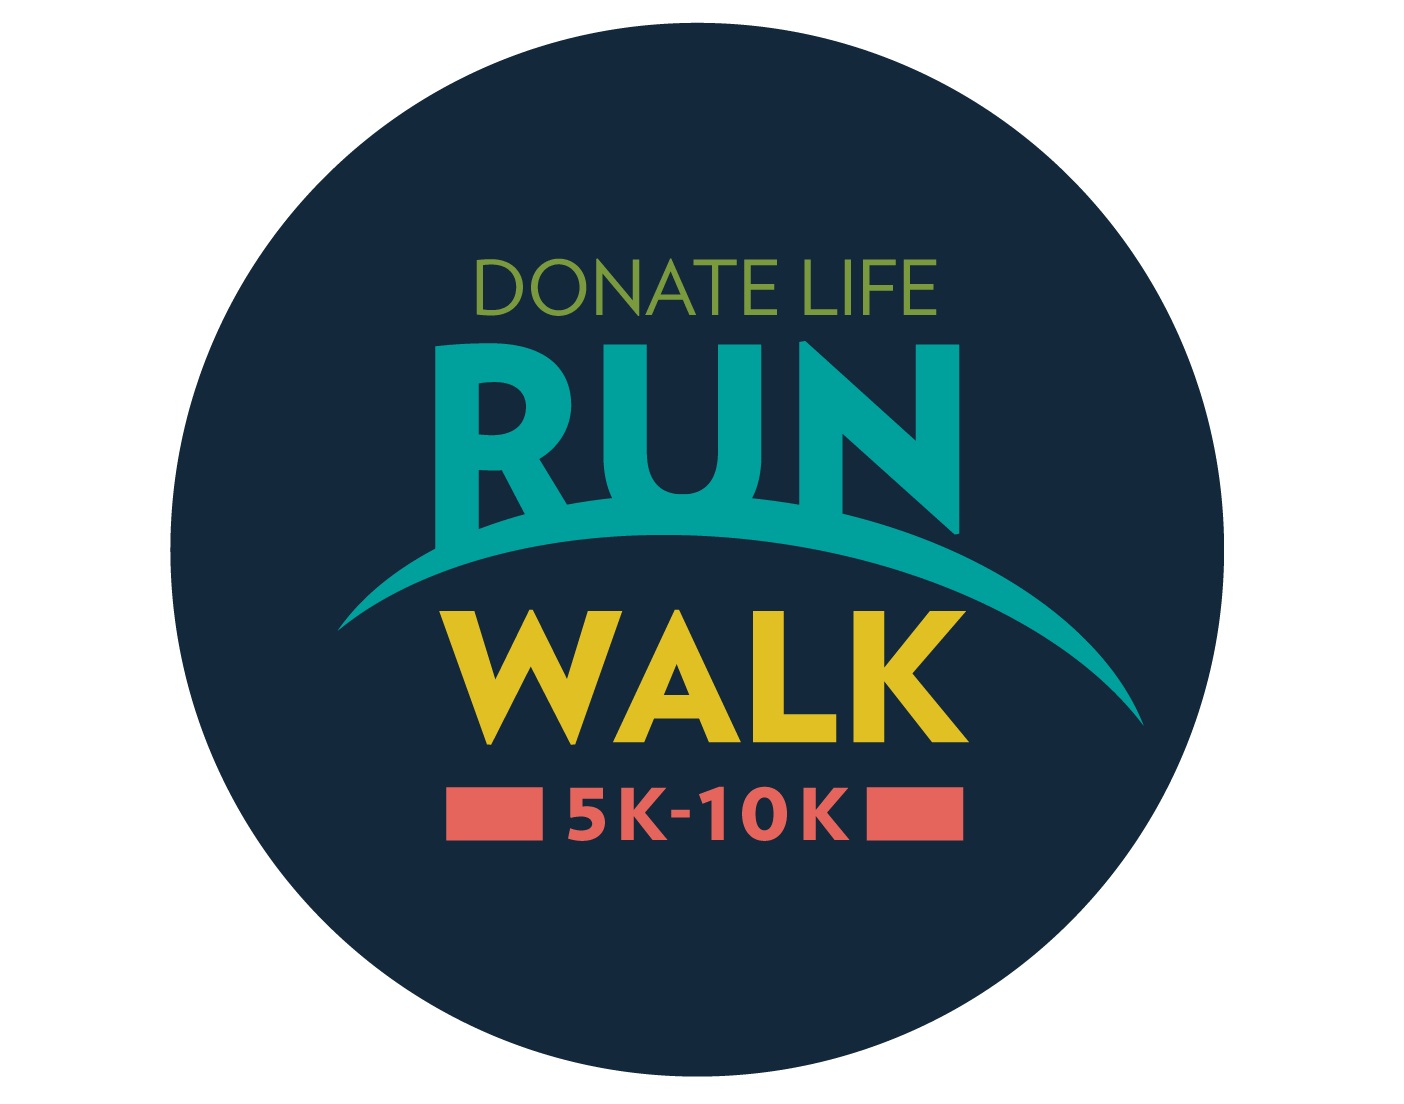 19-surprising-facts-about-donate-life-run-walk